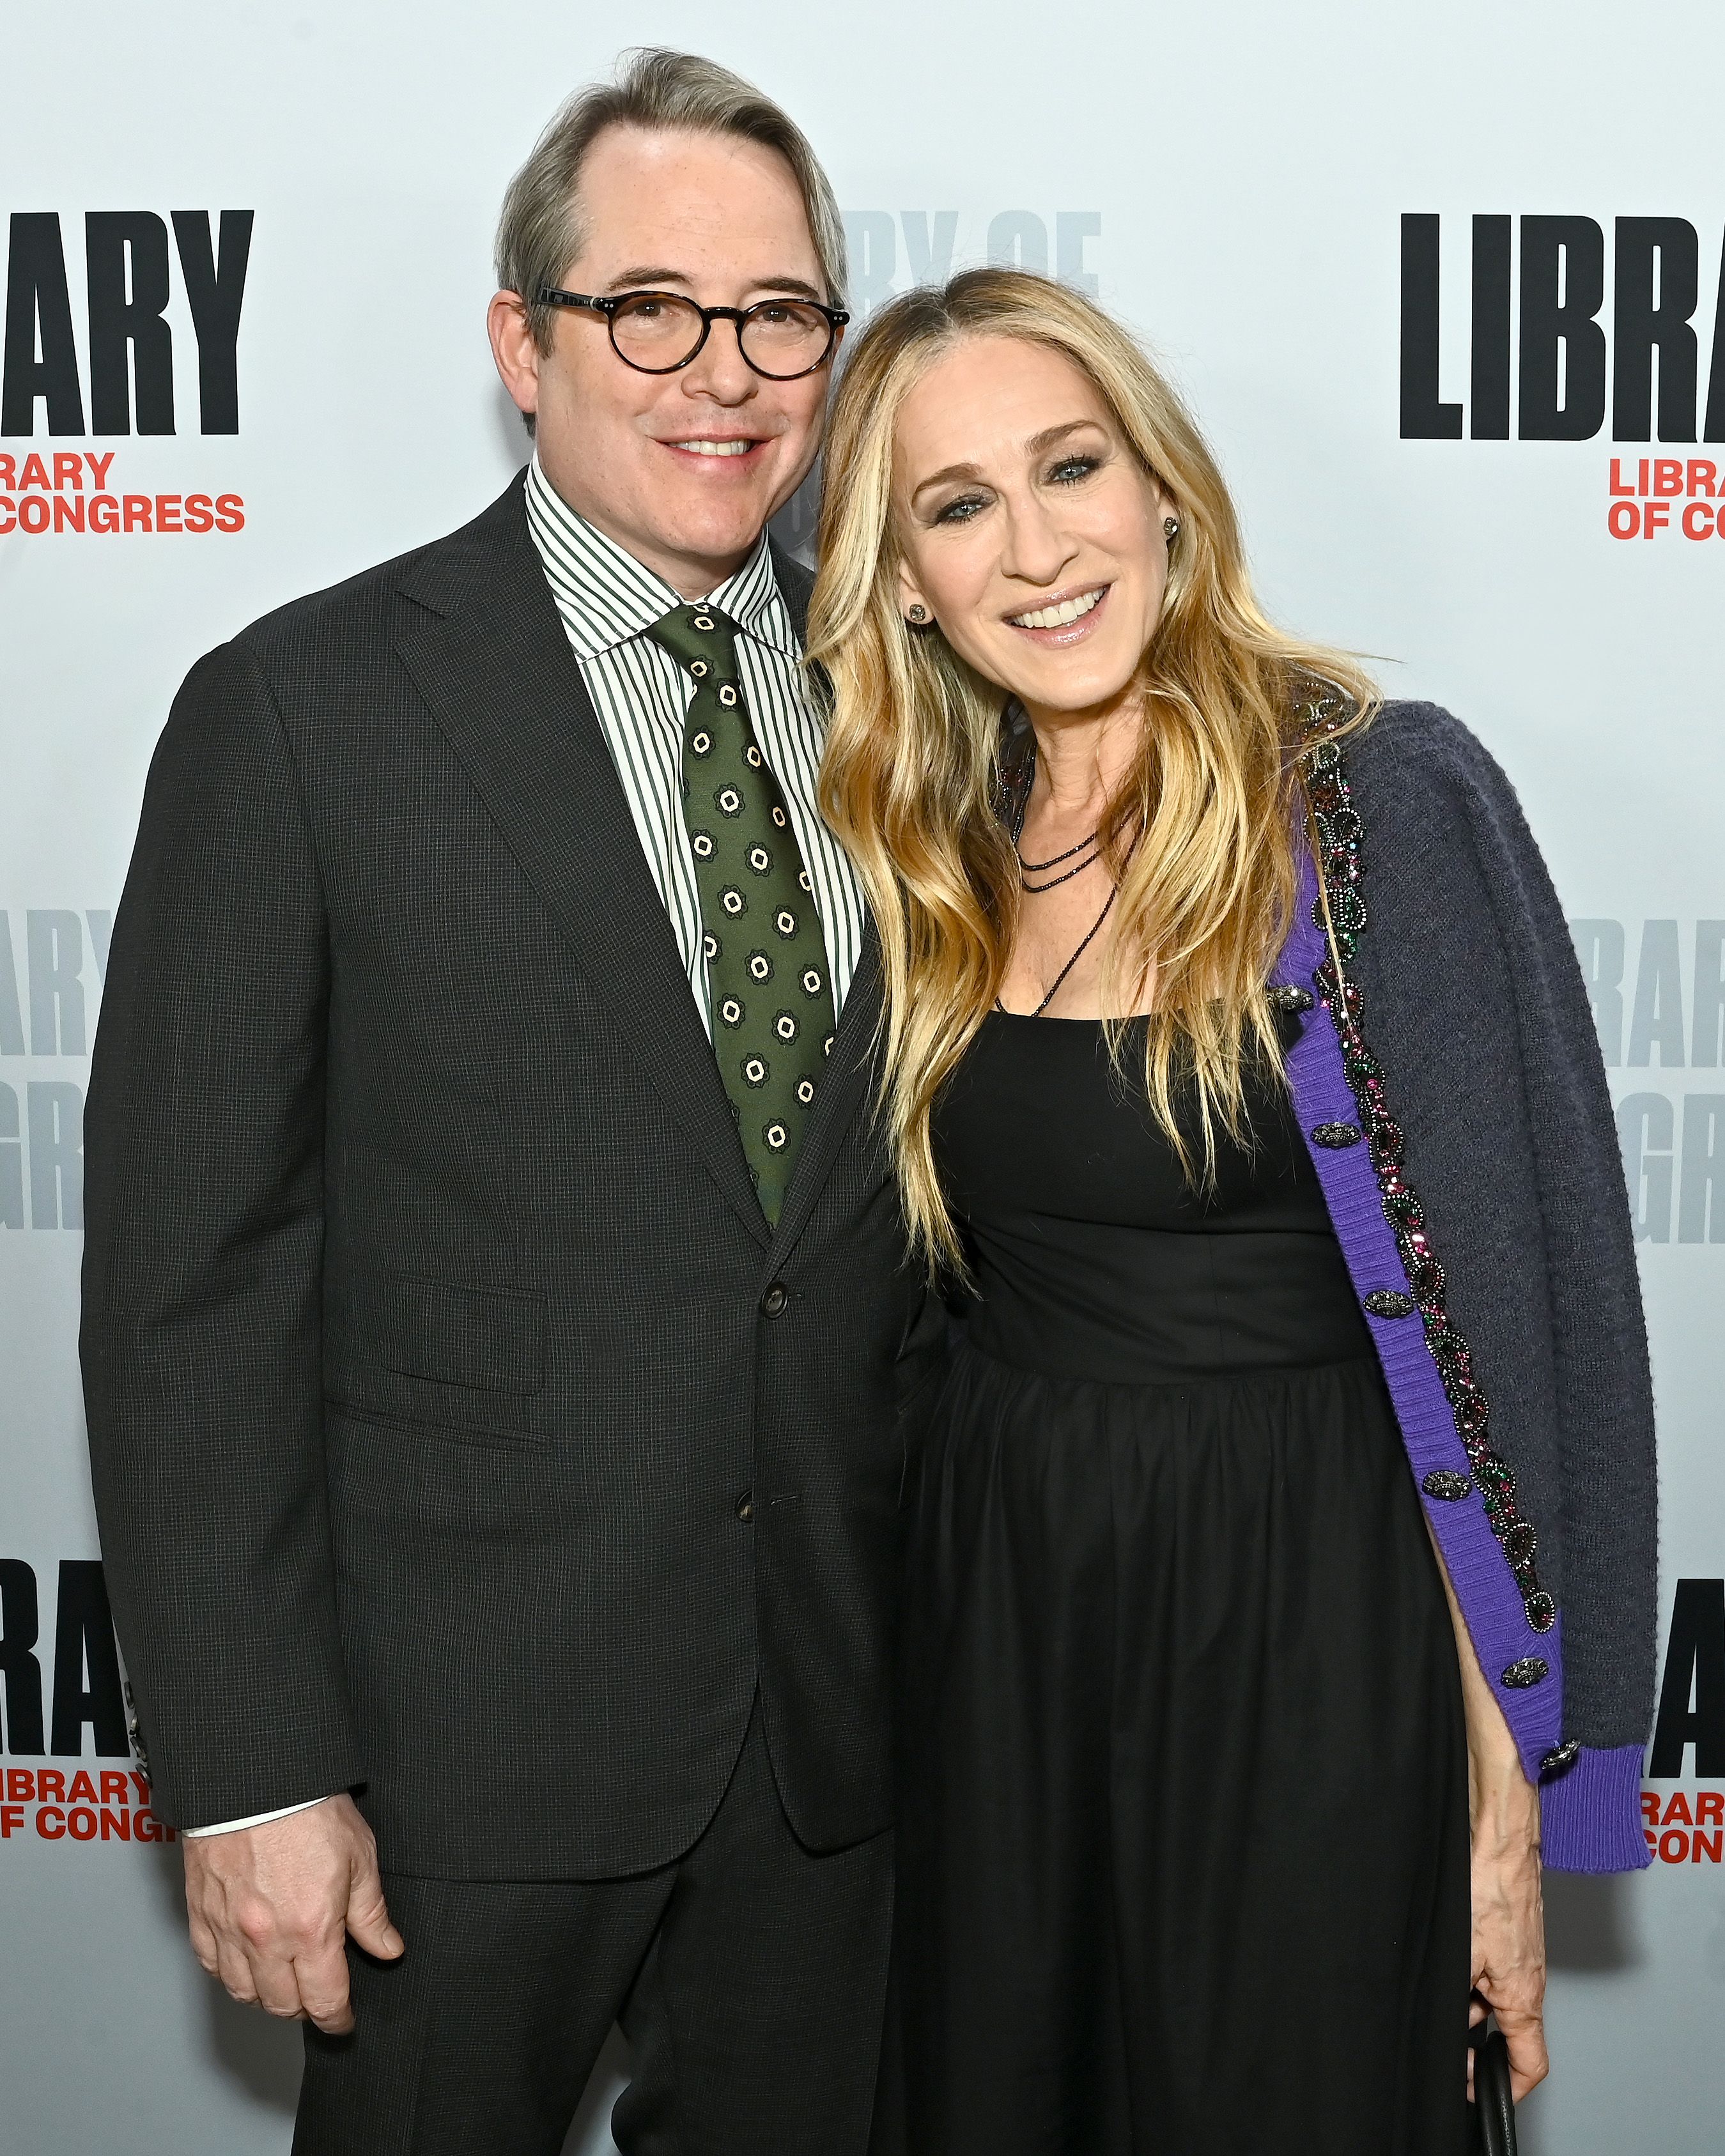 Sarah Jessica Parker and Matthew Broderick Complete Relationship Timeline image photo